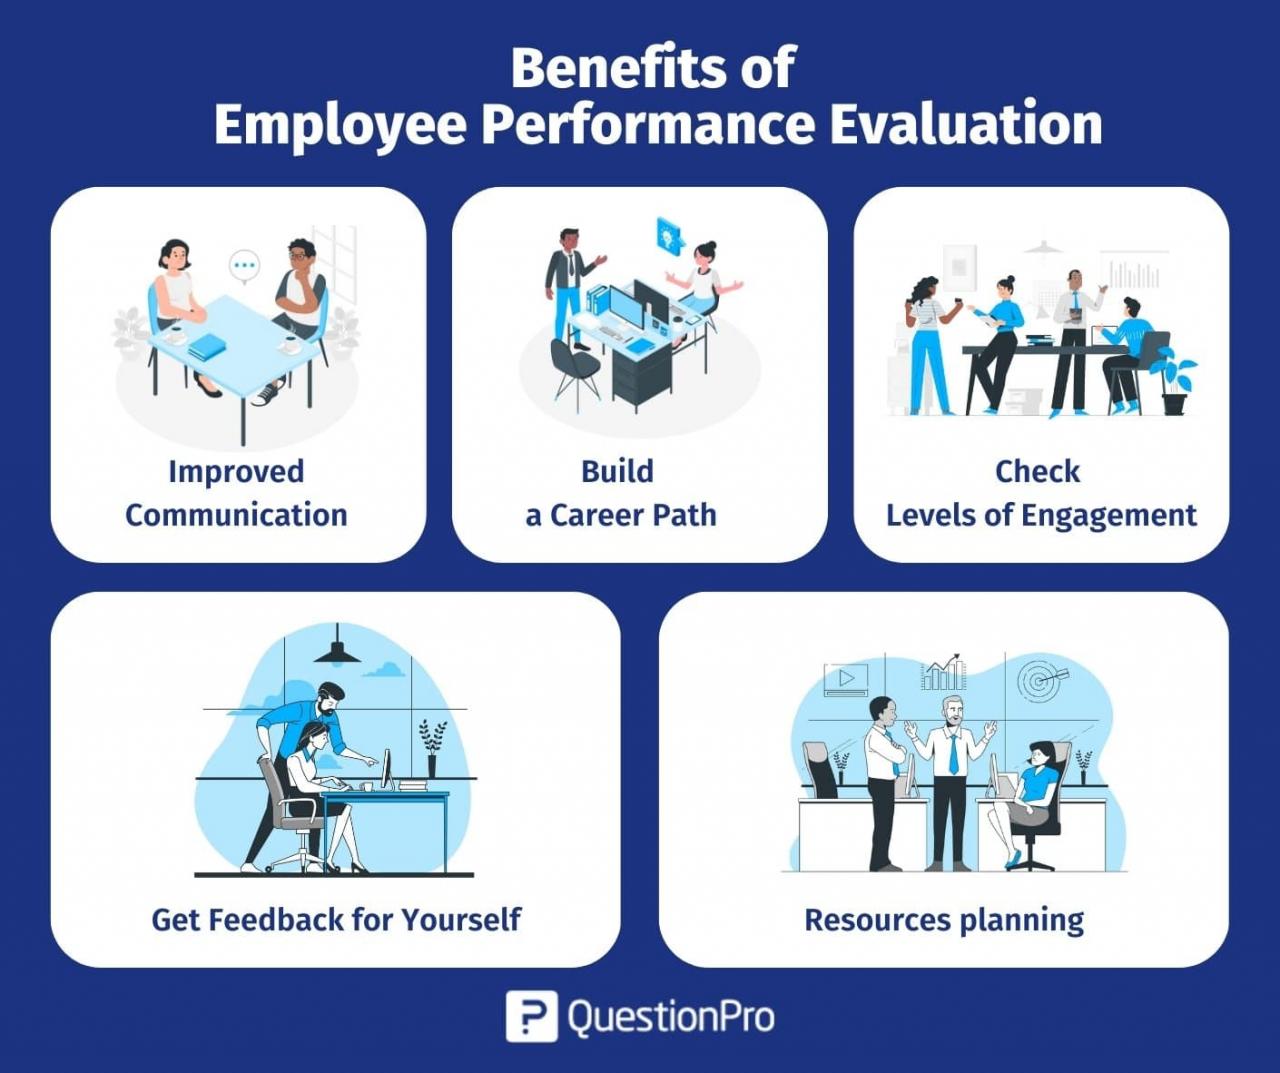 How to write an employee evaluation for performance